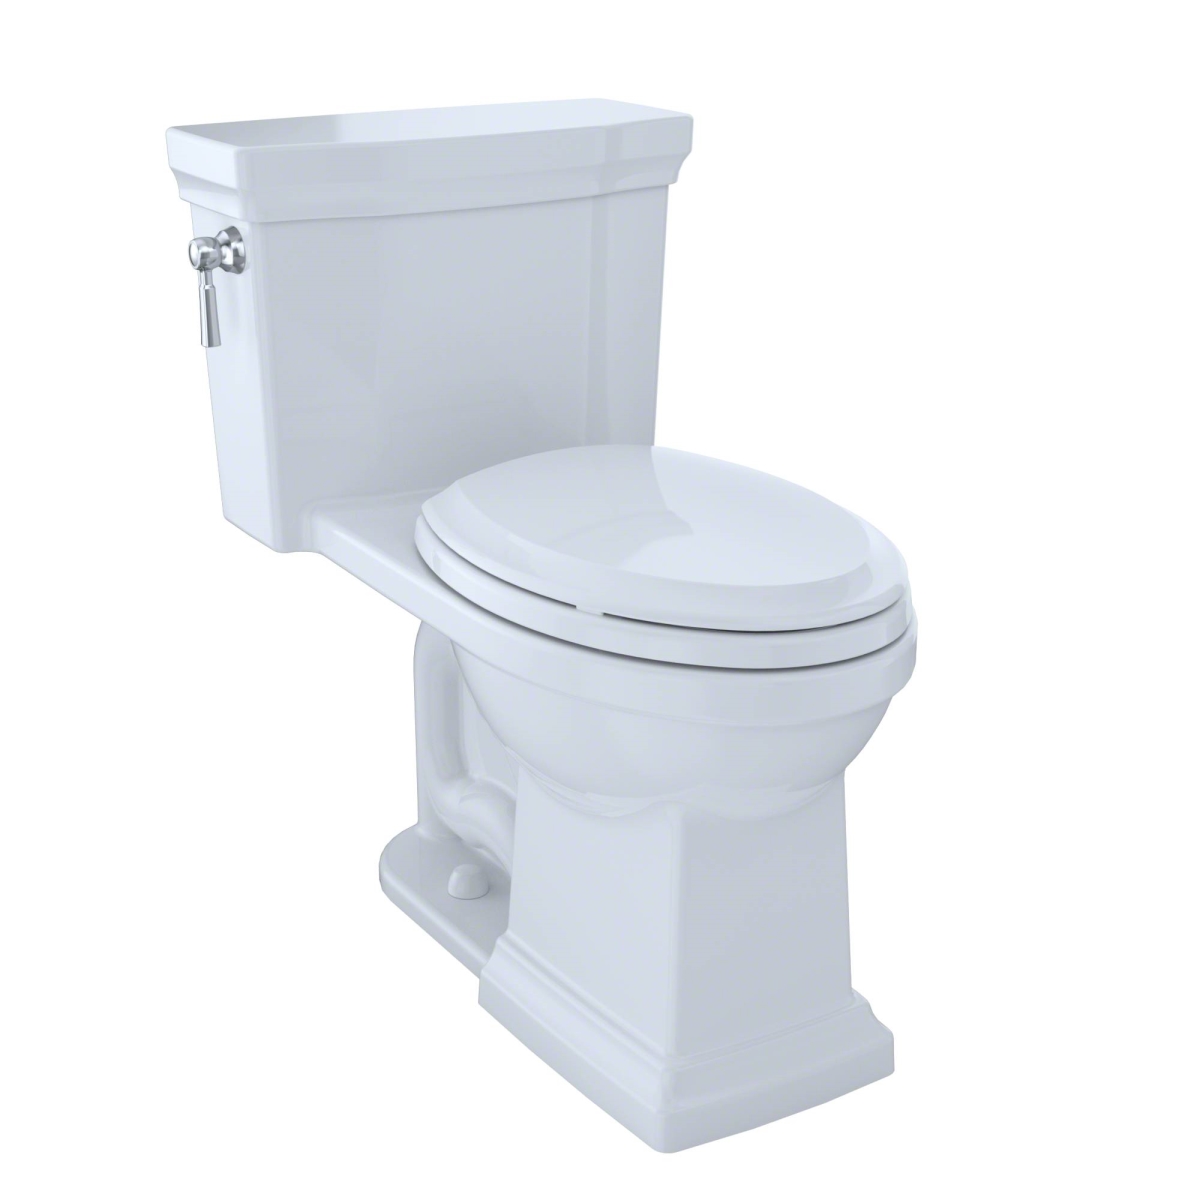 Ms814224cufg-01 Elongated 1.0 Gpf Universal Height Toilet With Cefiontect, Cotton White